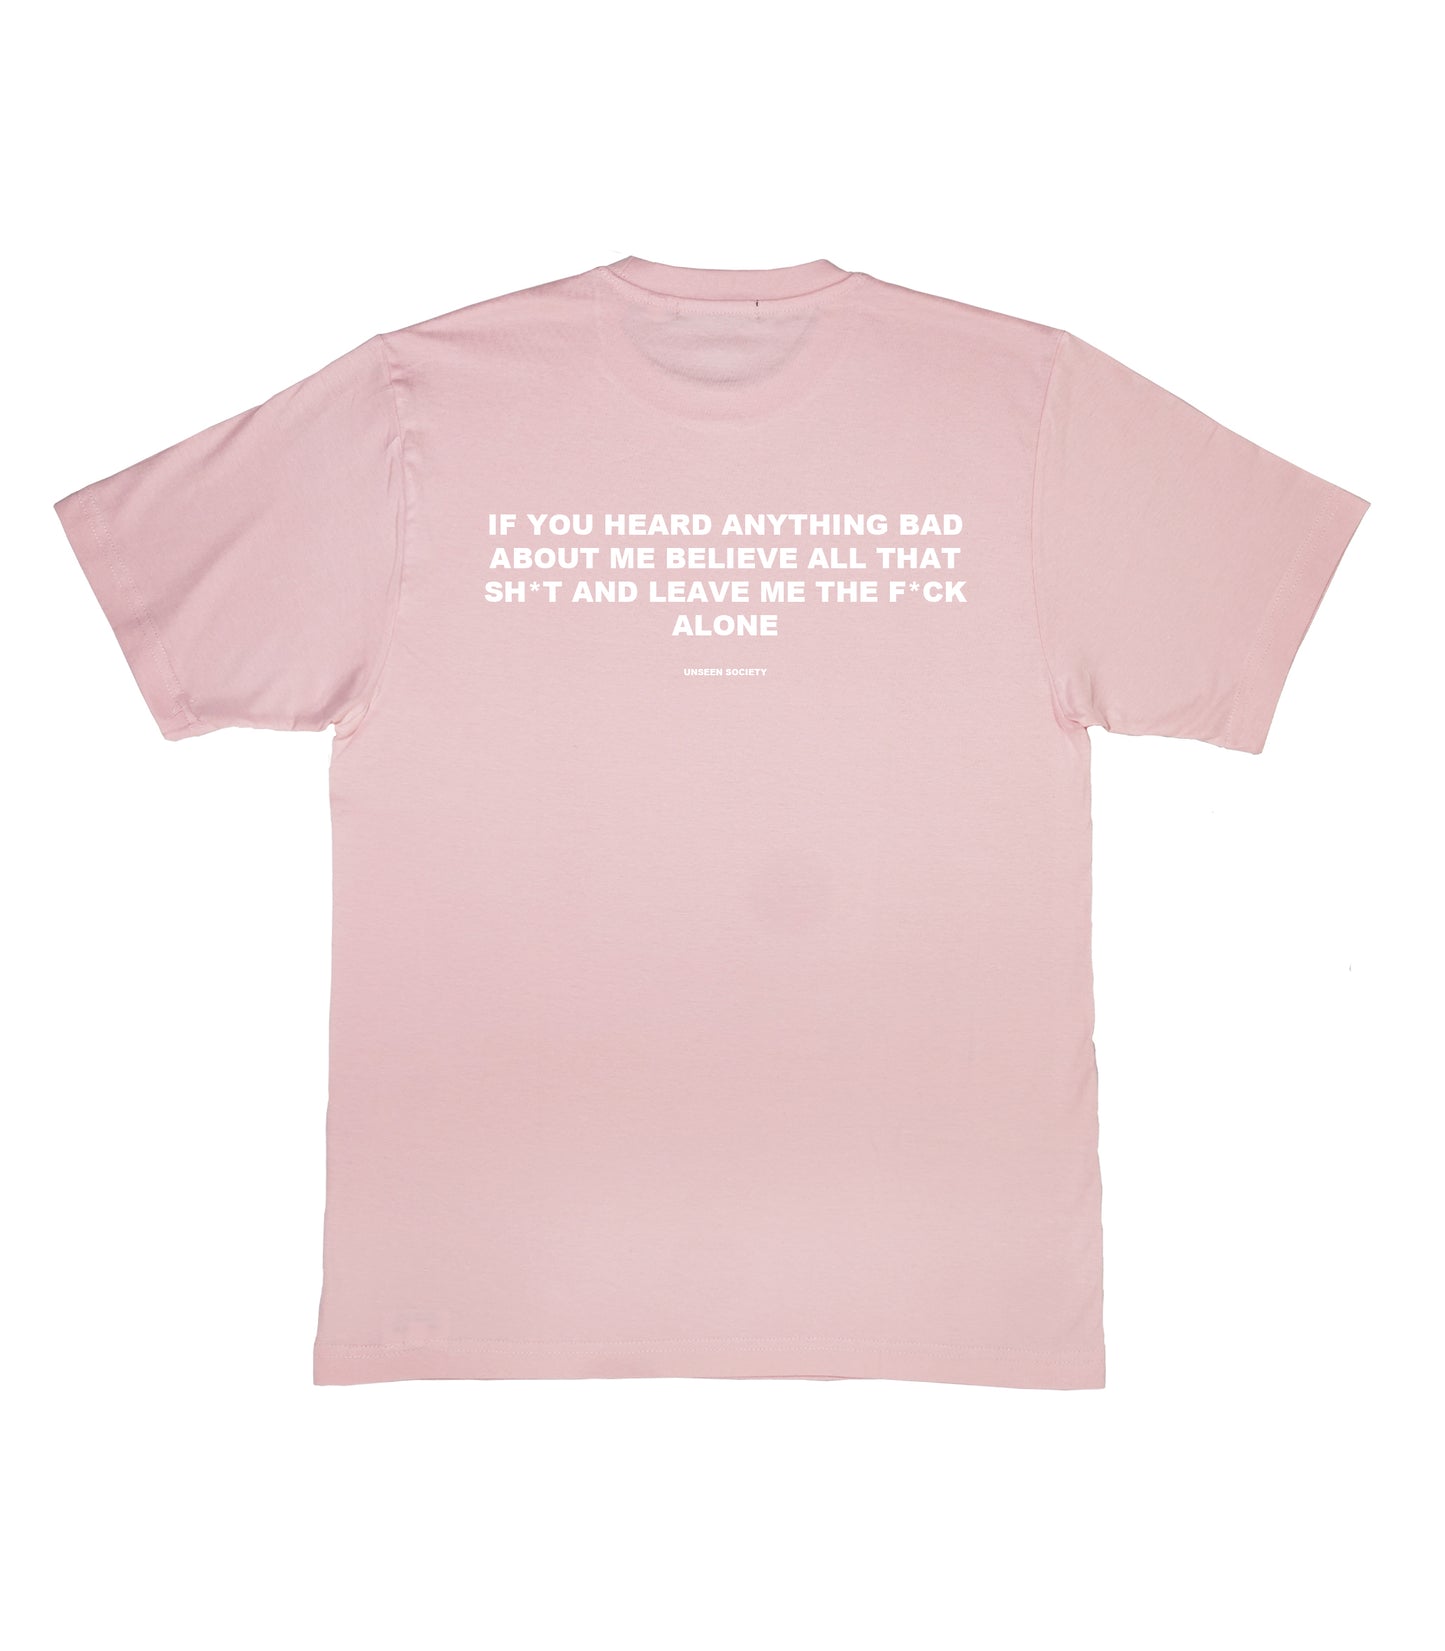 Leave me alone quote tee